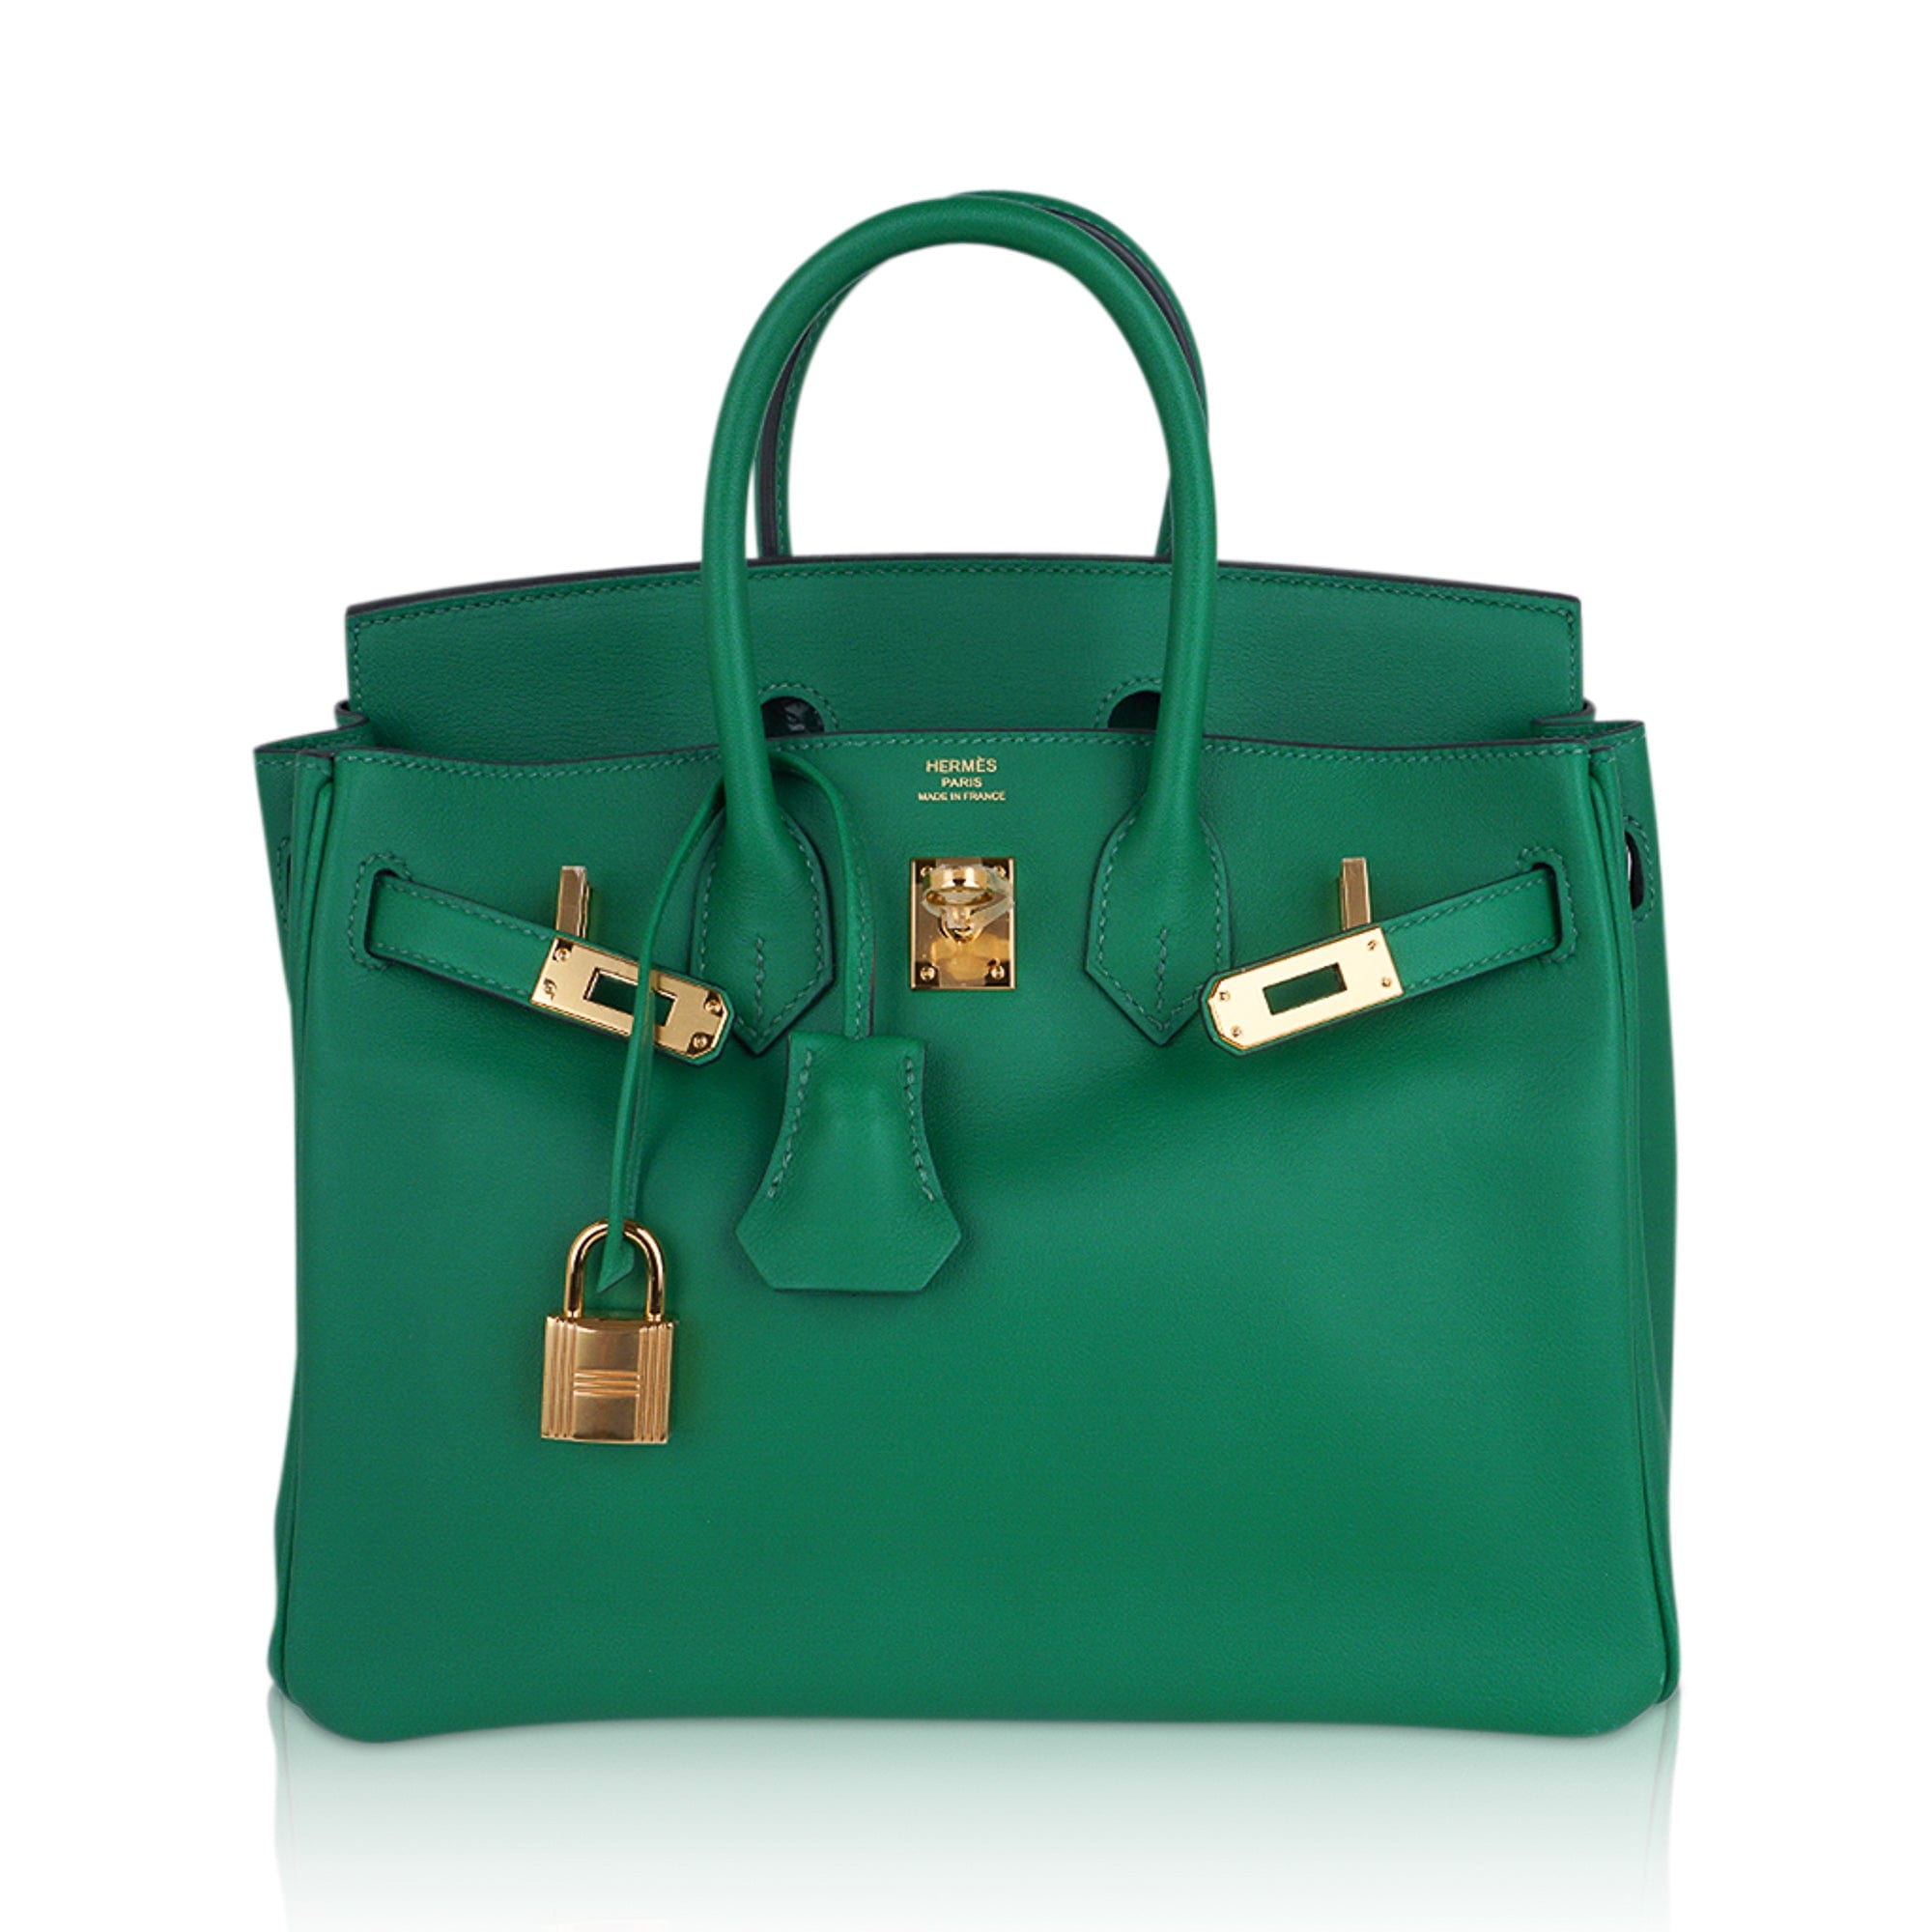 Hermes Birkin 25 Bag in Cactus Swift Leather with Gold Hardware – Mightychic